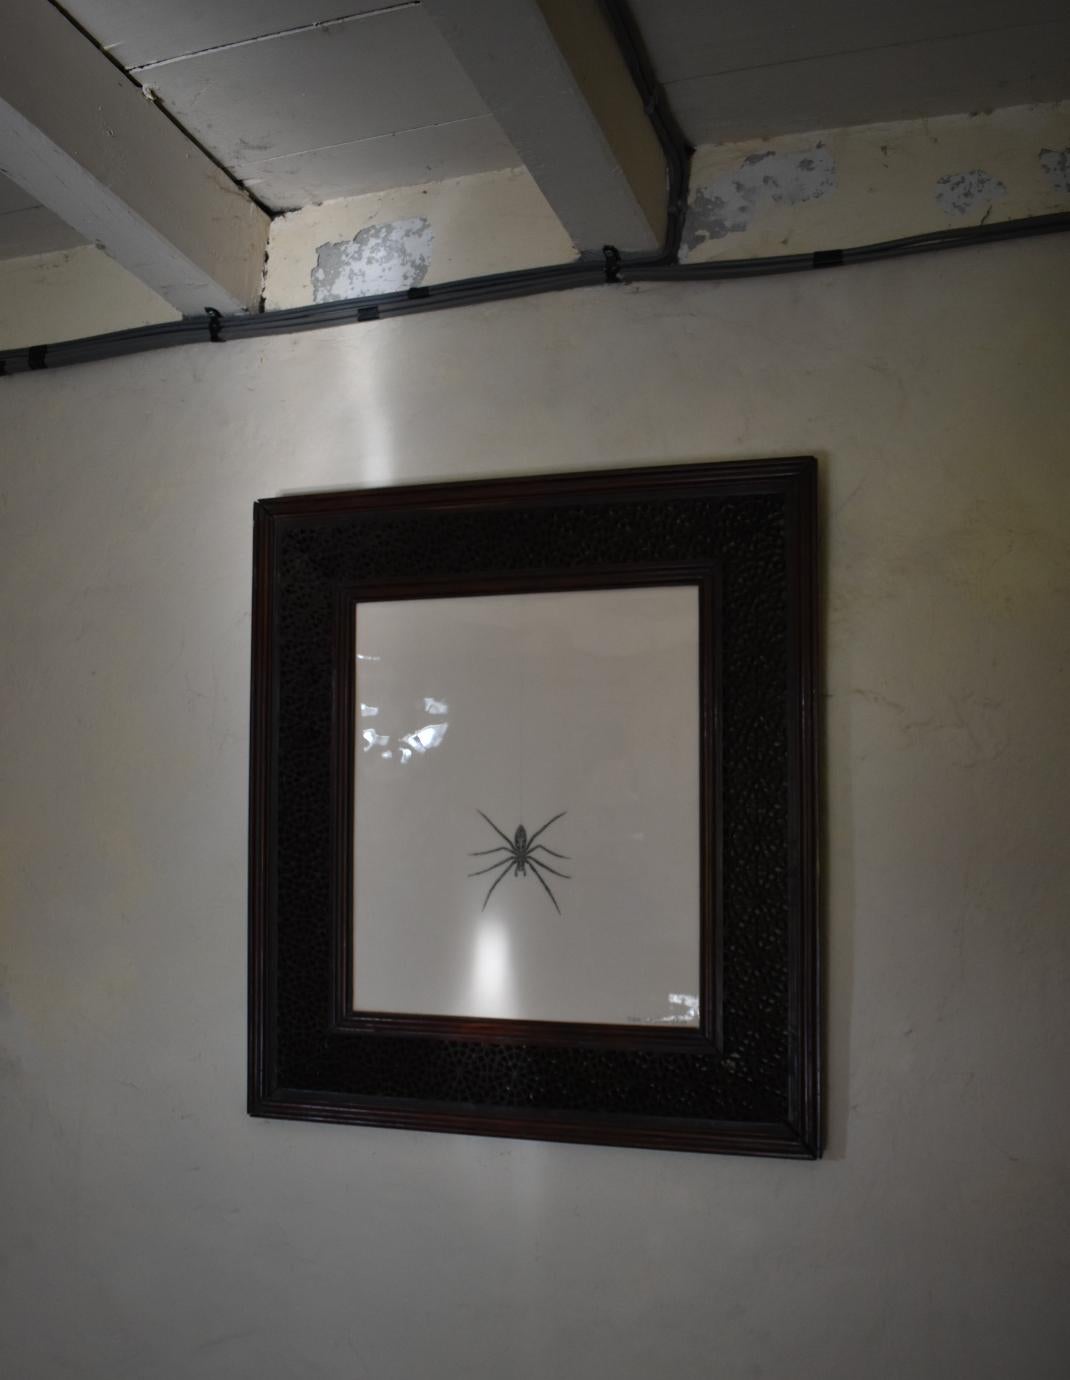 A giant house spider, in a hand-carved spiderweb patterned frame, circa 1880